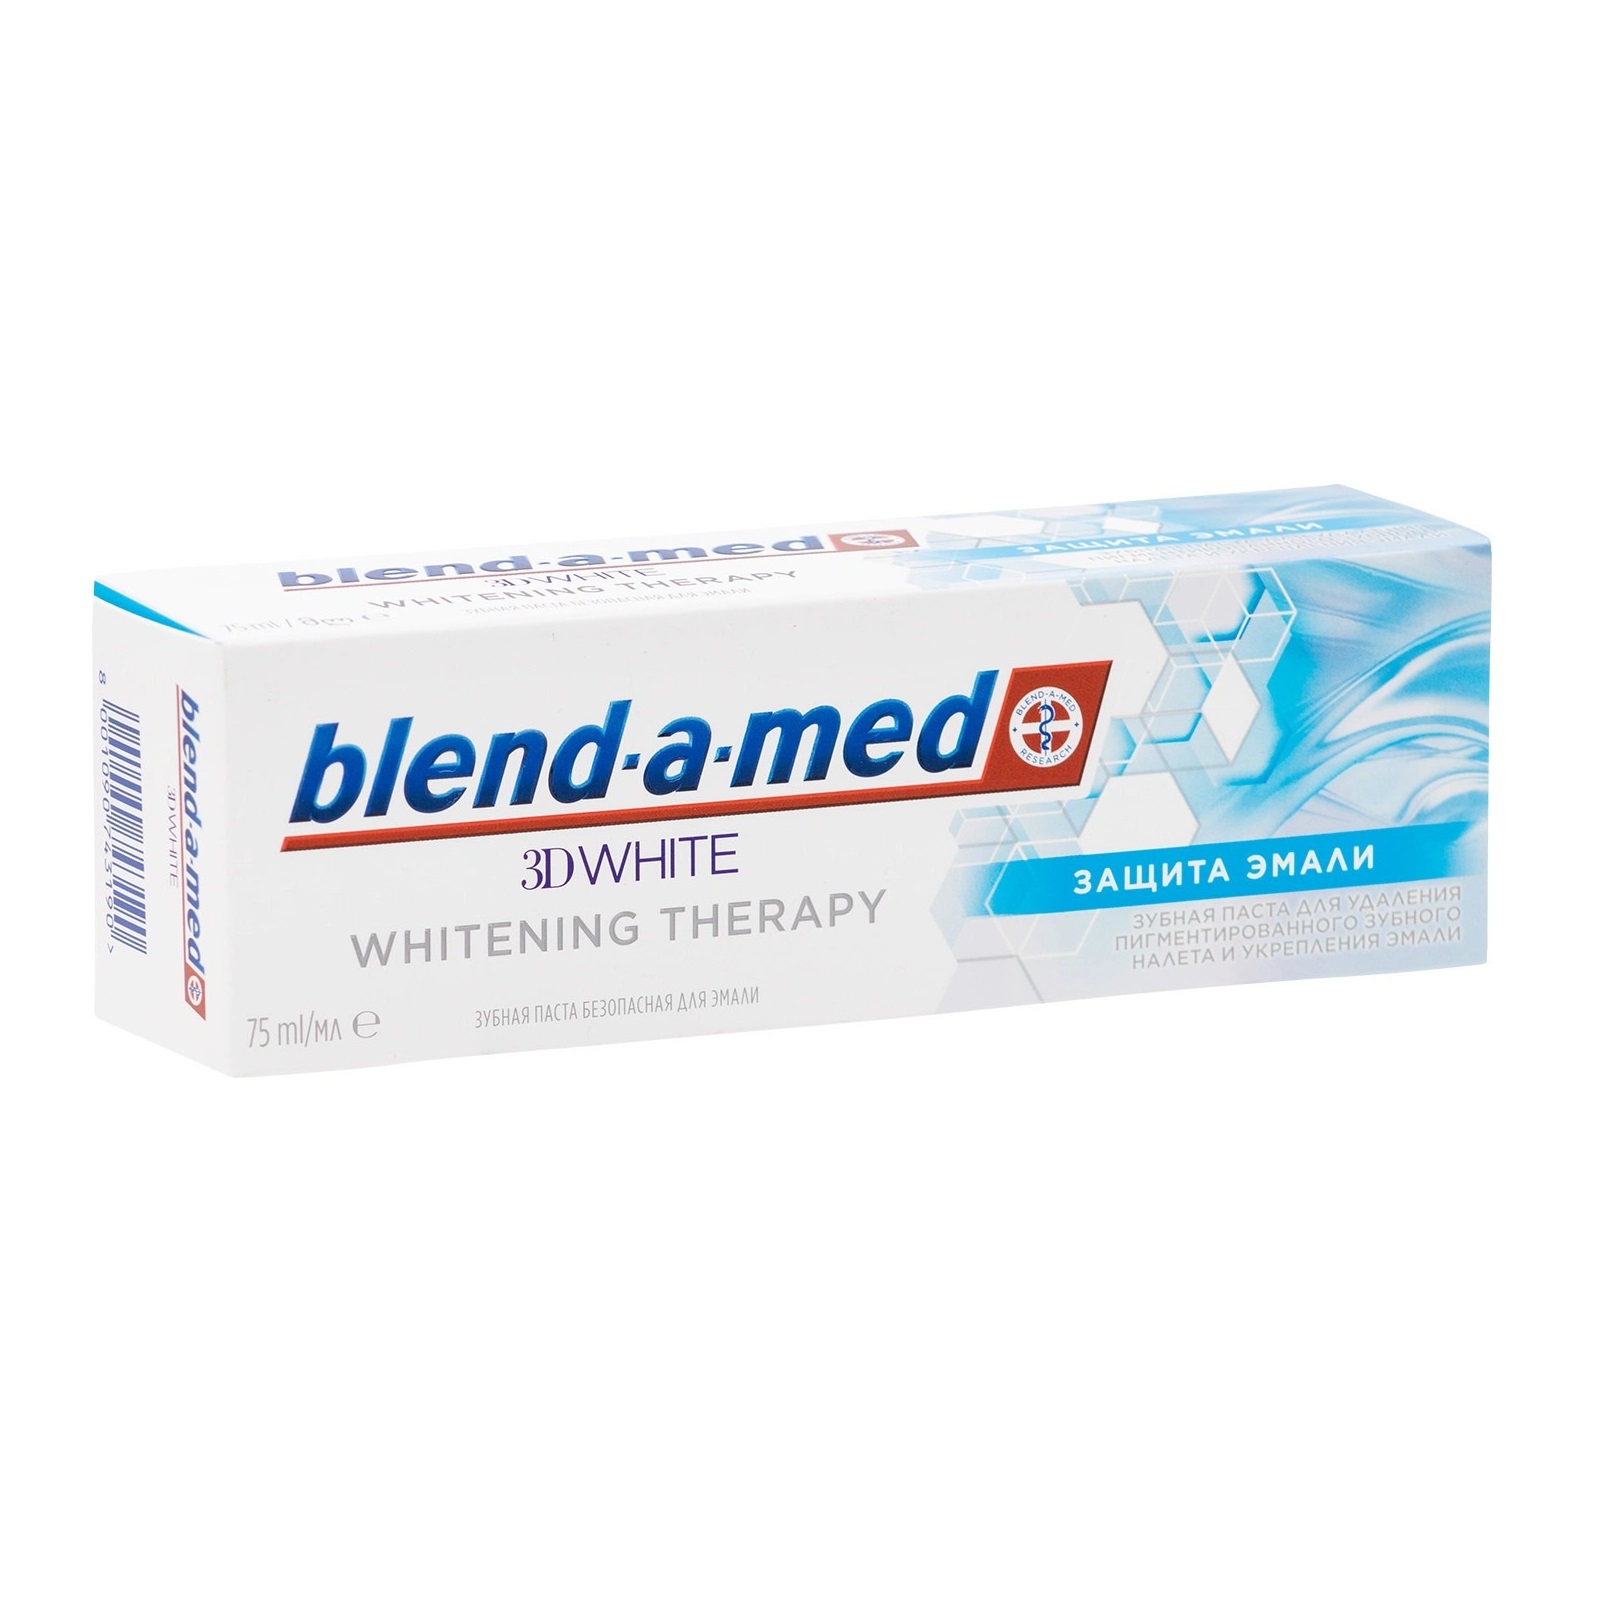 фото Зубная паста blend-a-med 3d white whitening therapy защита эмали 75 мл